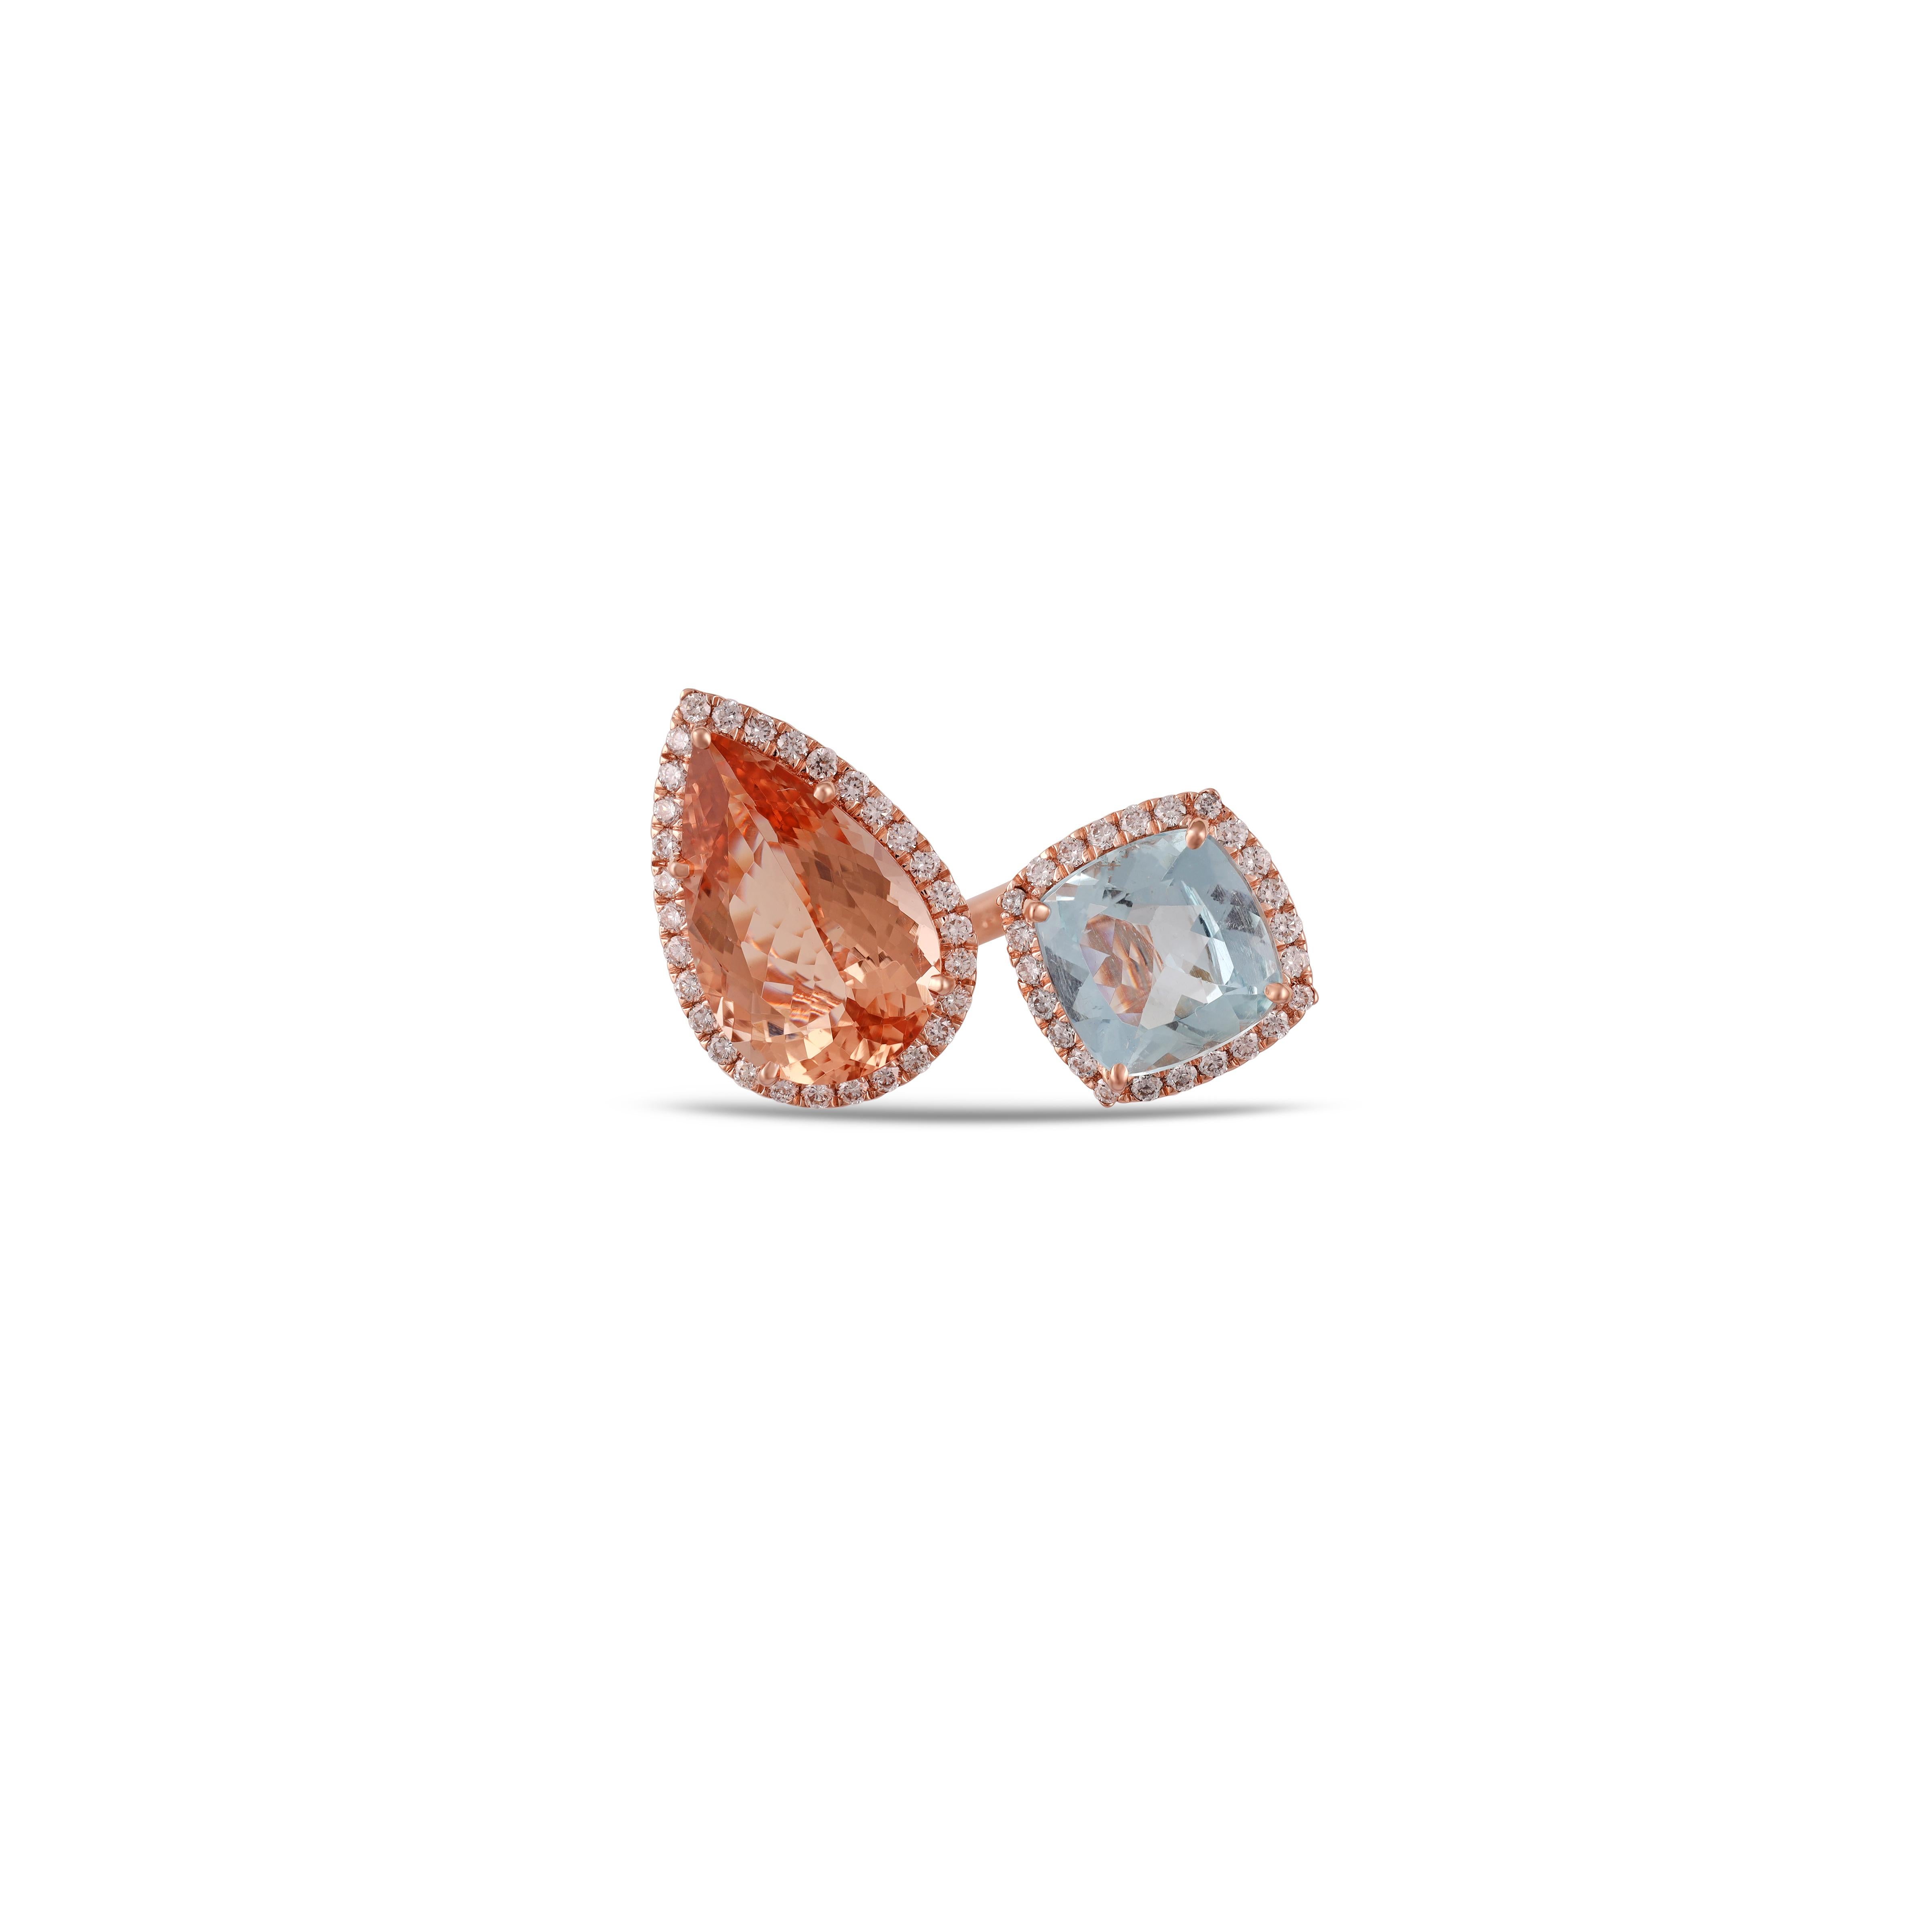 If you are looking for Morganite Ring, this is the ultimate find, (6.28 carats) of the finest Morganite color is the focal point. & Aquamarine (3.37 Carat) Perfectly matched in color, size, luster, and transparency. The color is what you want. The